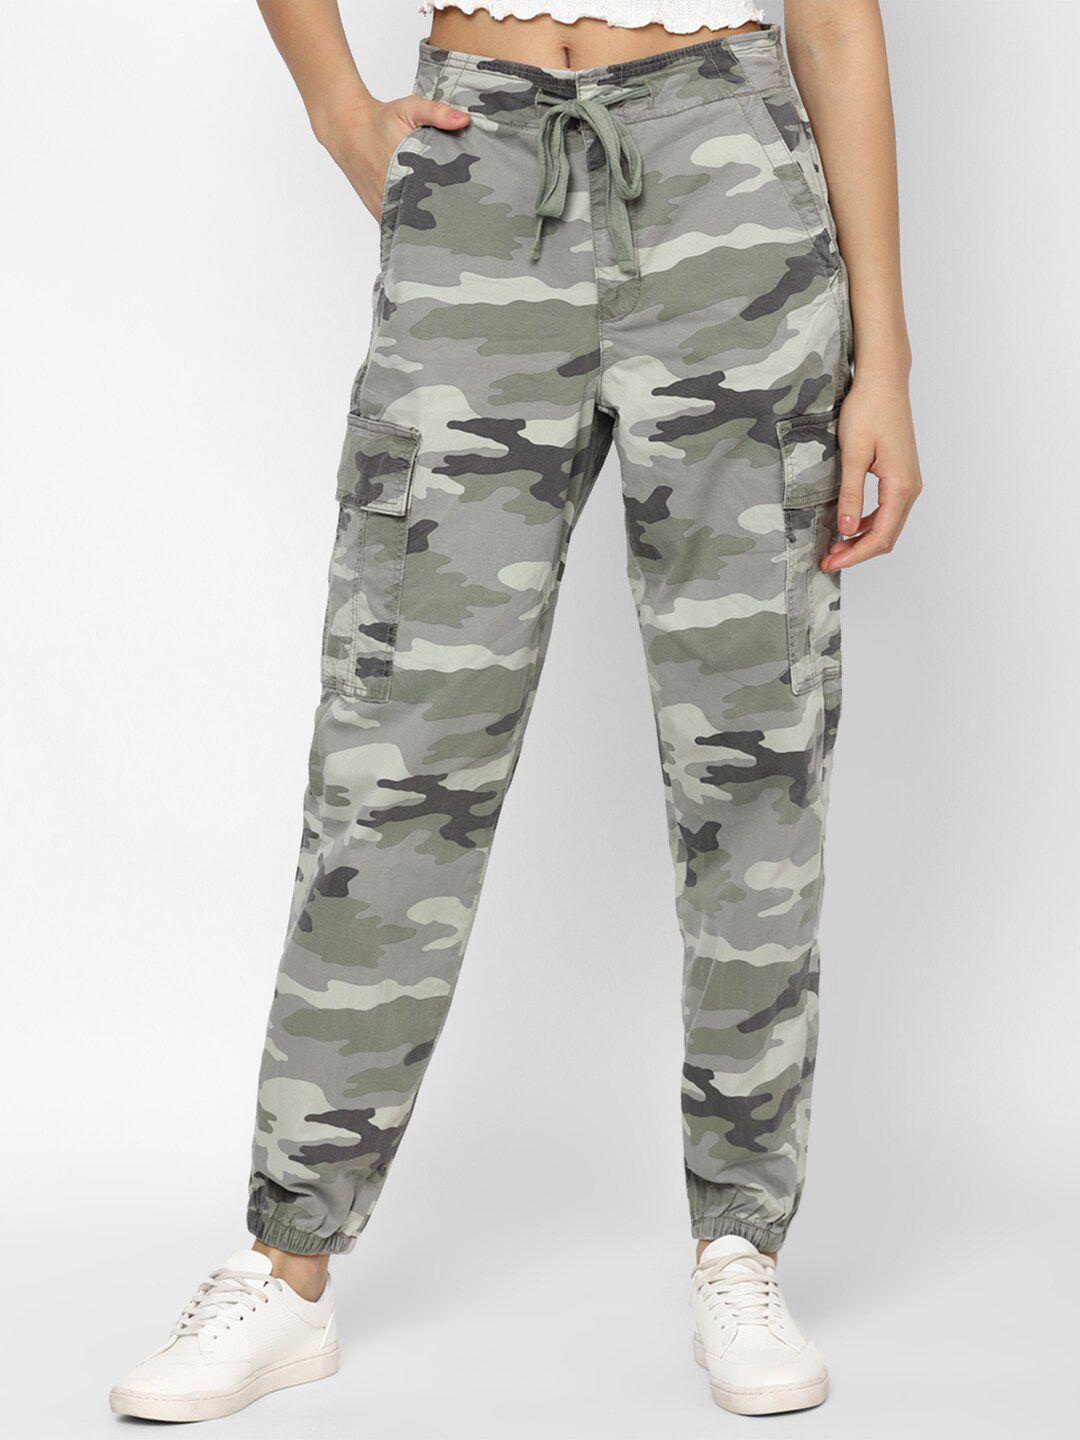 AMERICAN EAGLE OUTFITTERS Women Camouflage Printed Joggers